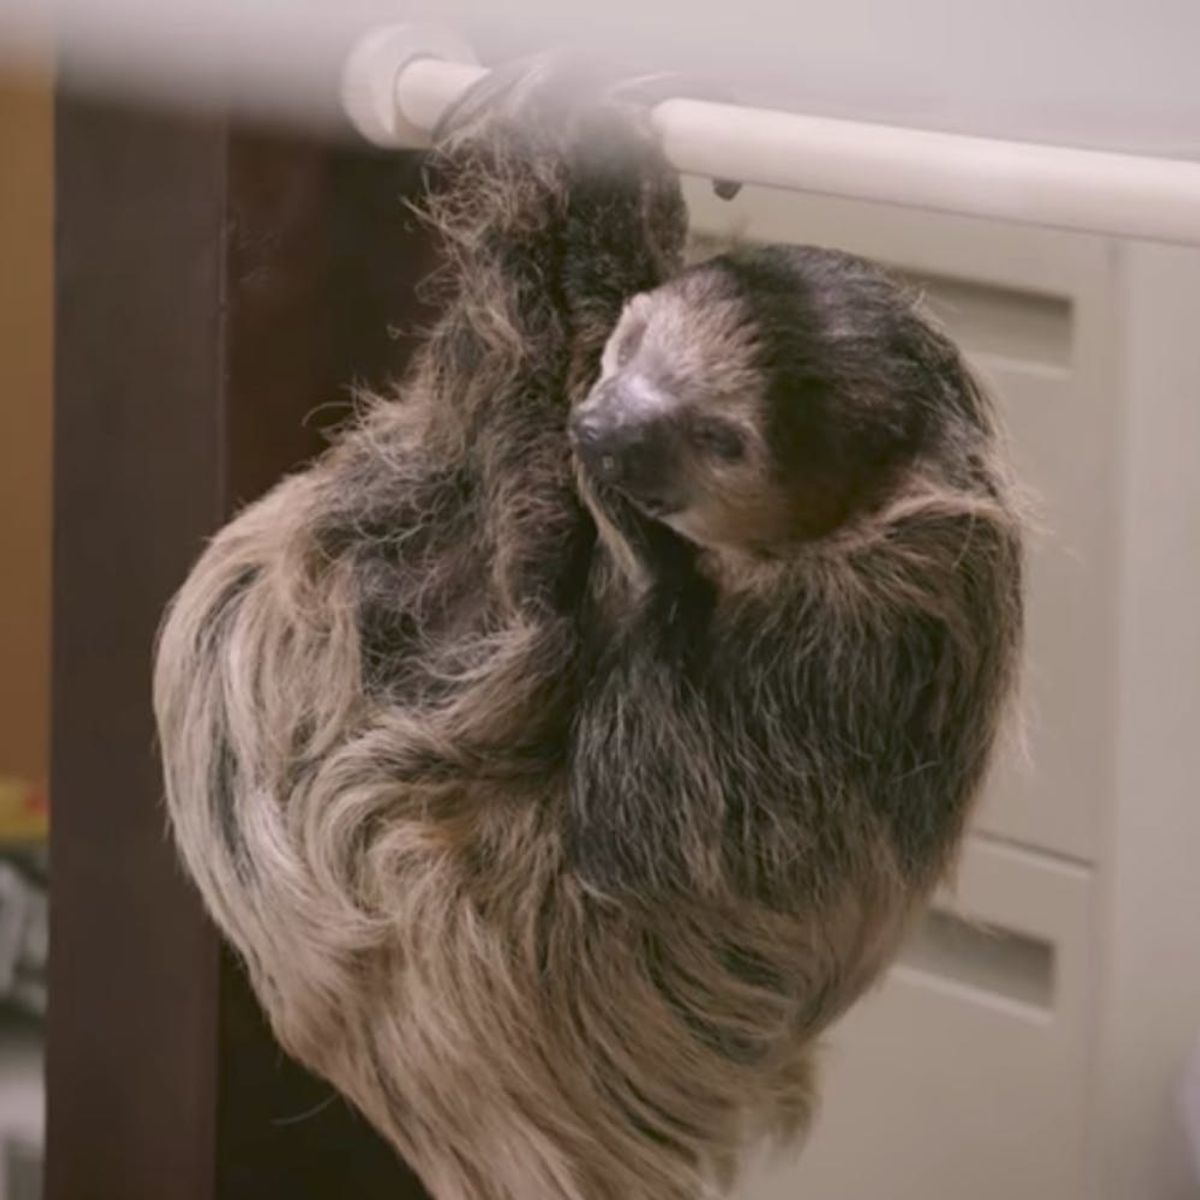 Watch as Sloths Take Over a DMV Just Like in Disney’s “Zootopia”